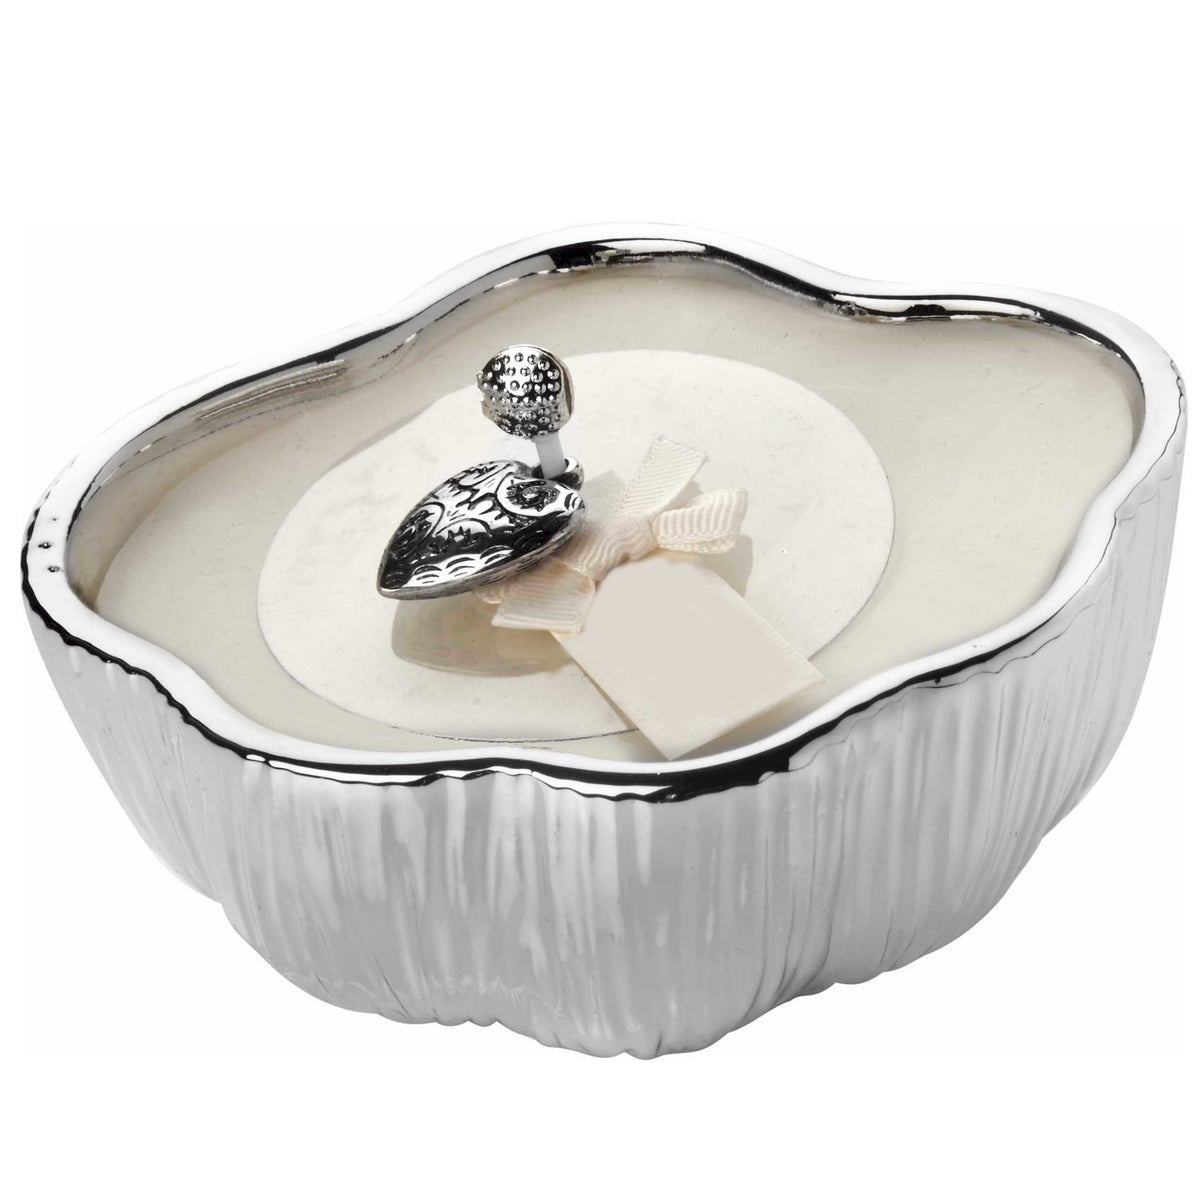 AMORE: Silver plated shaped candle ~ LINFA soothing fresh scent - Artistica.com